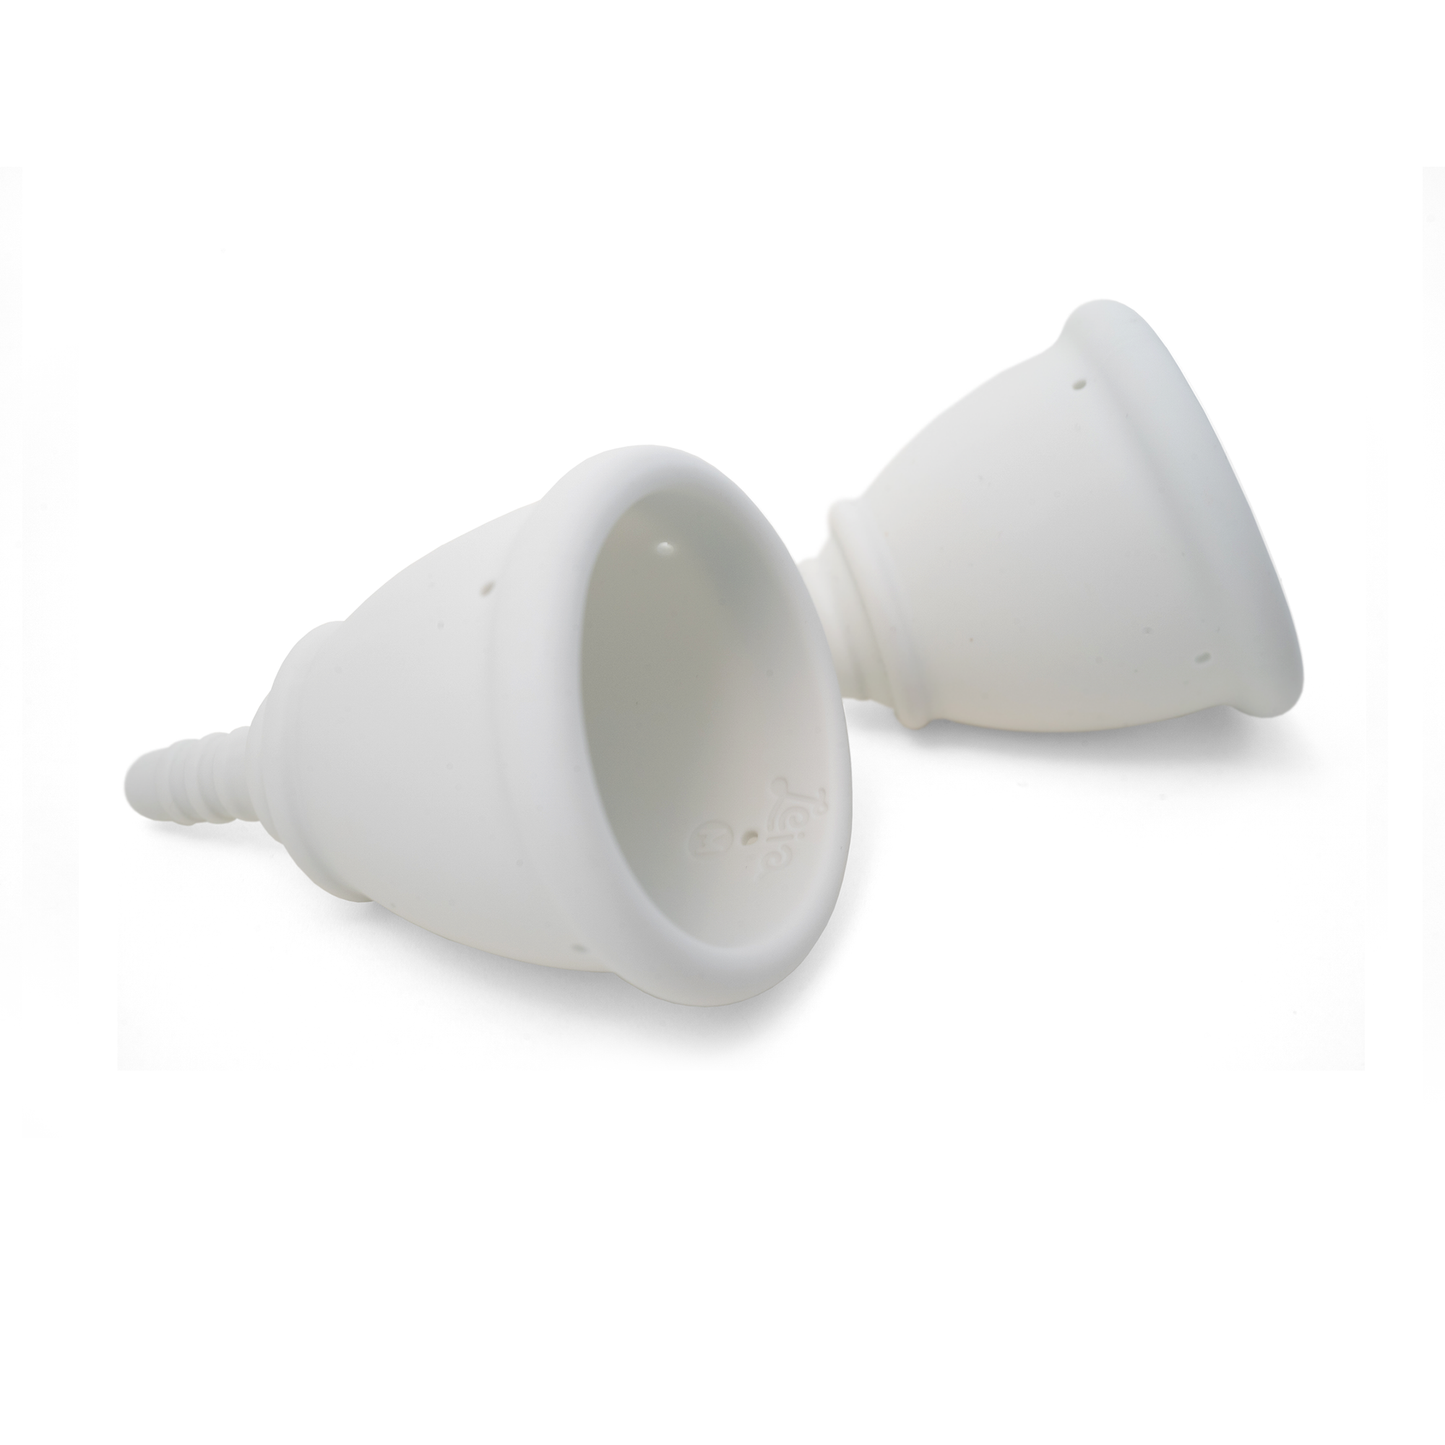 LEIA Menstrual Cup — Size M